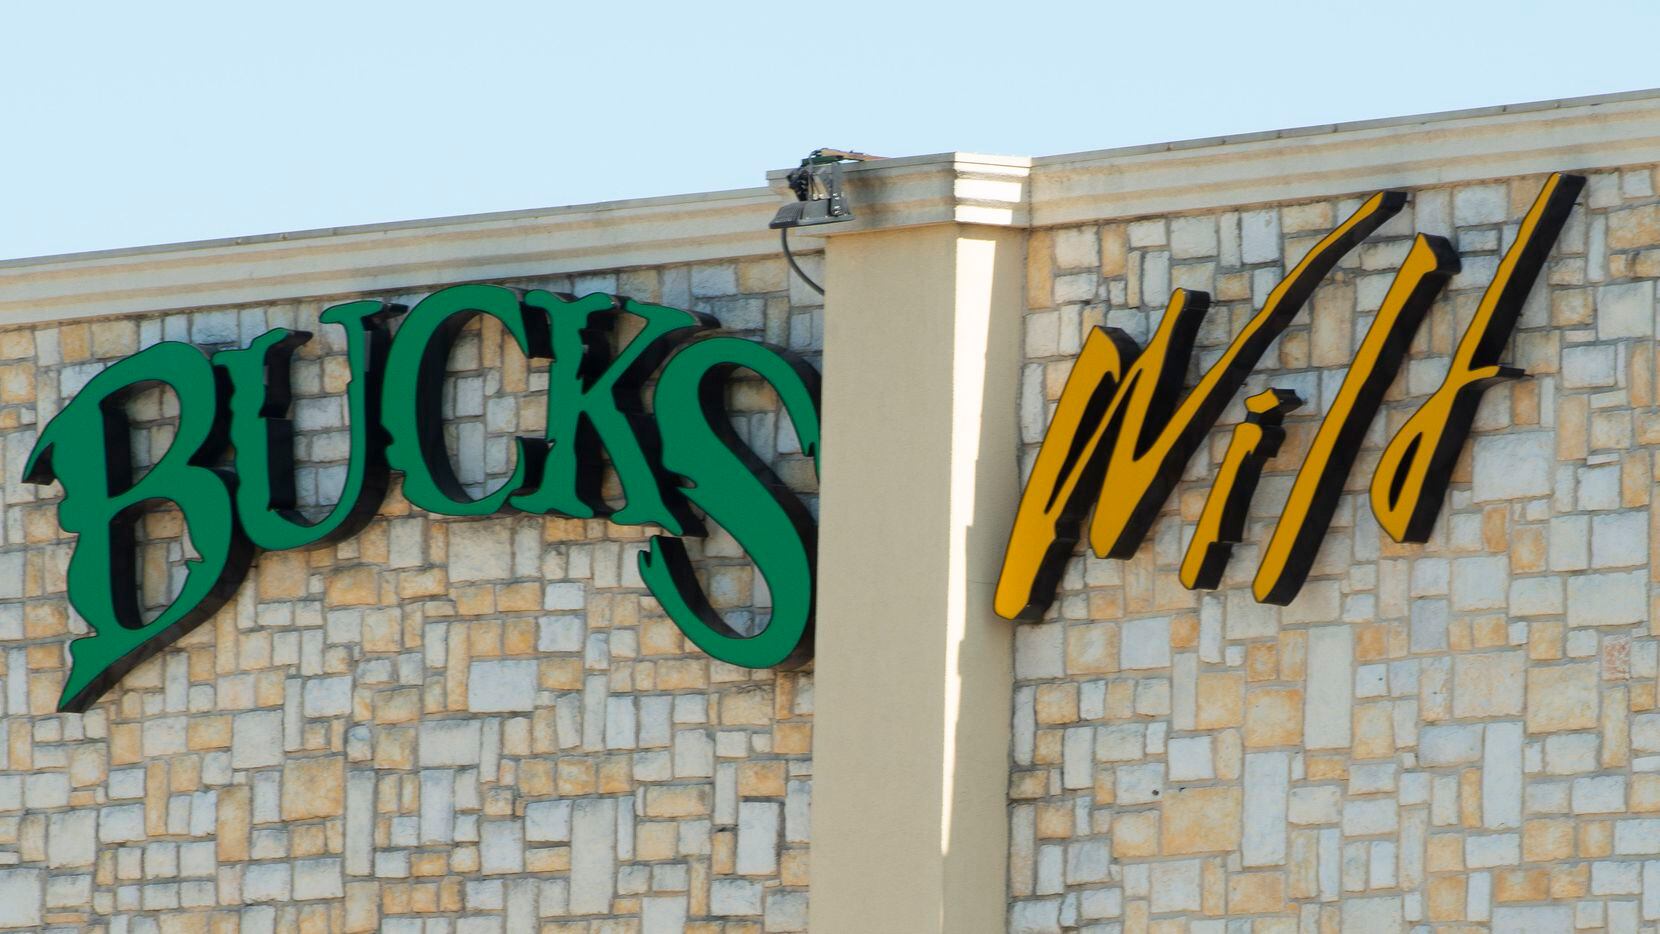 Bucks Wild strip club at 5316 Superior Parkway on May 6, 2020  in Fort Worth is suing the city to reopen during the Coronavirus pandemic. (Robert W. Hart/Special Contributor)